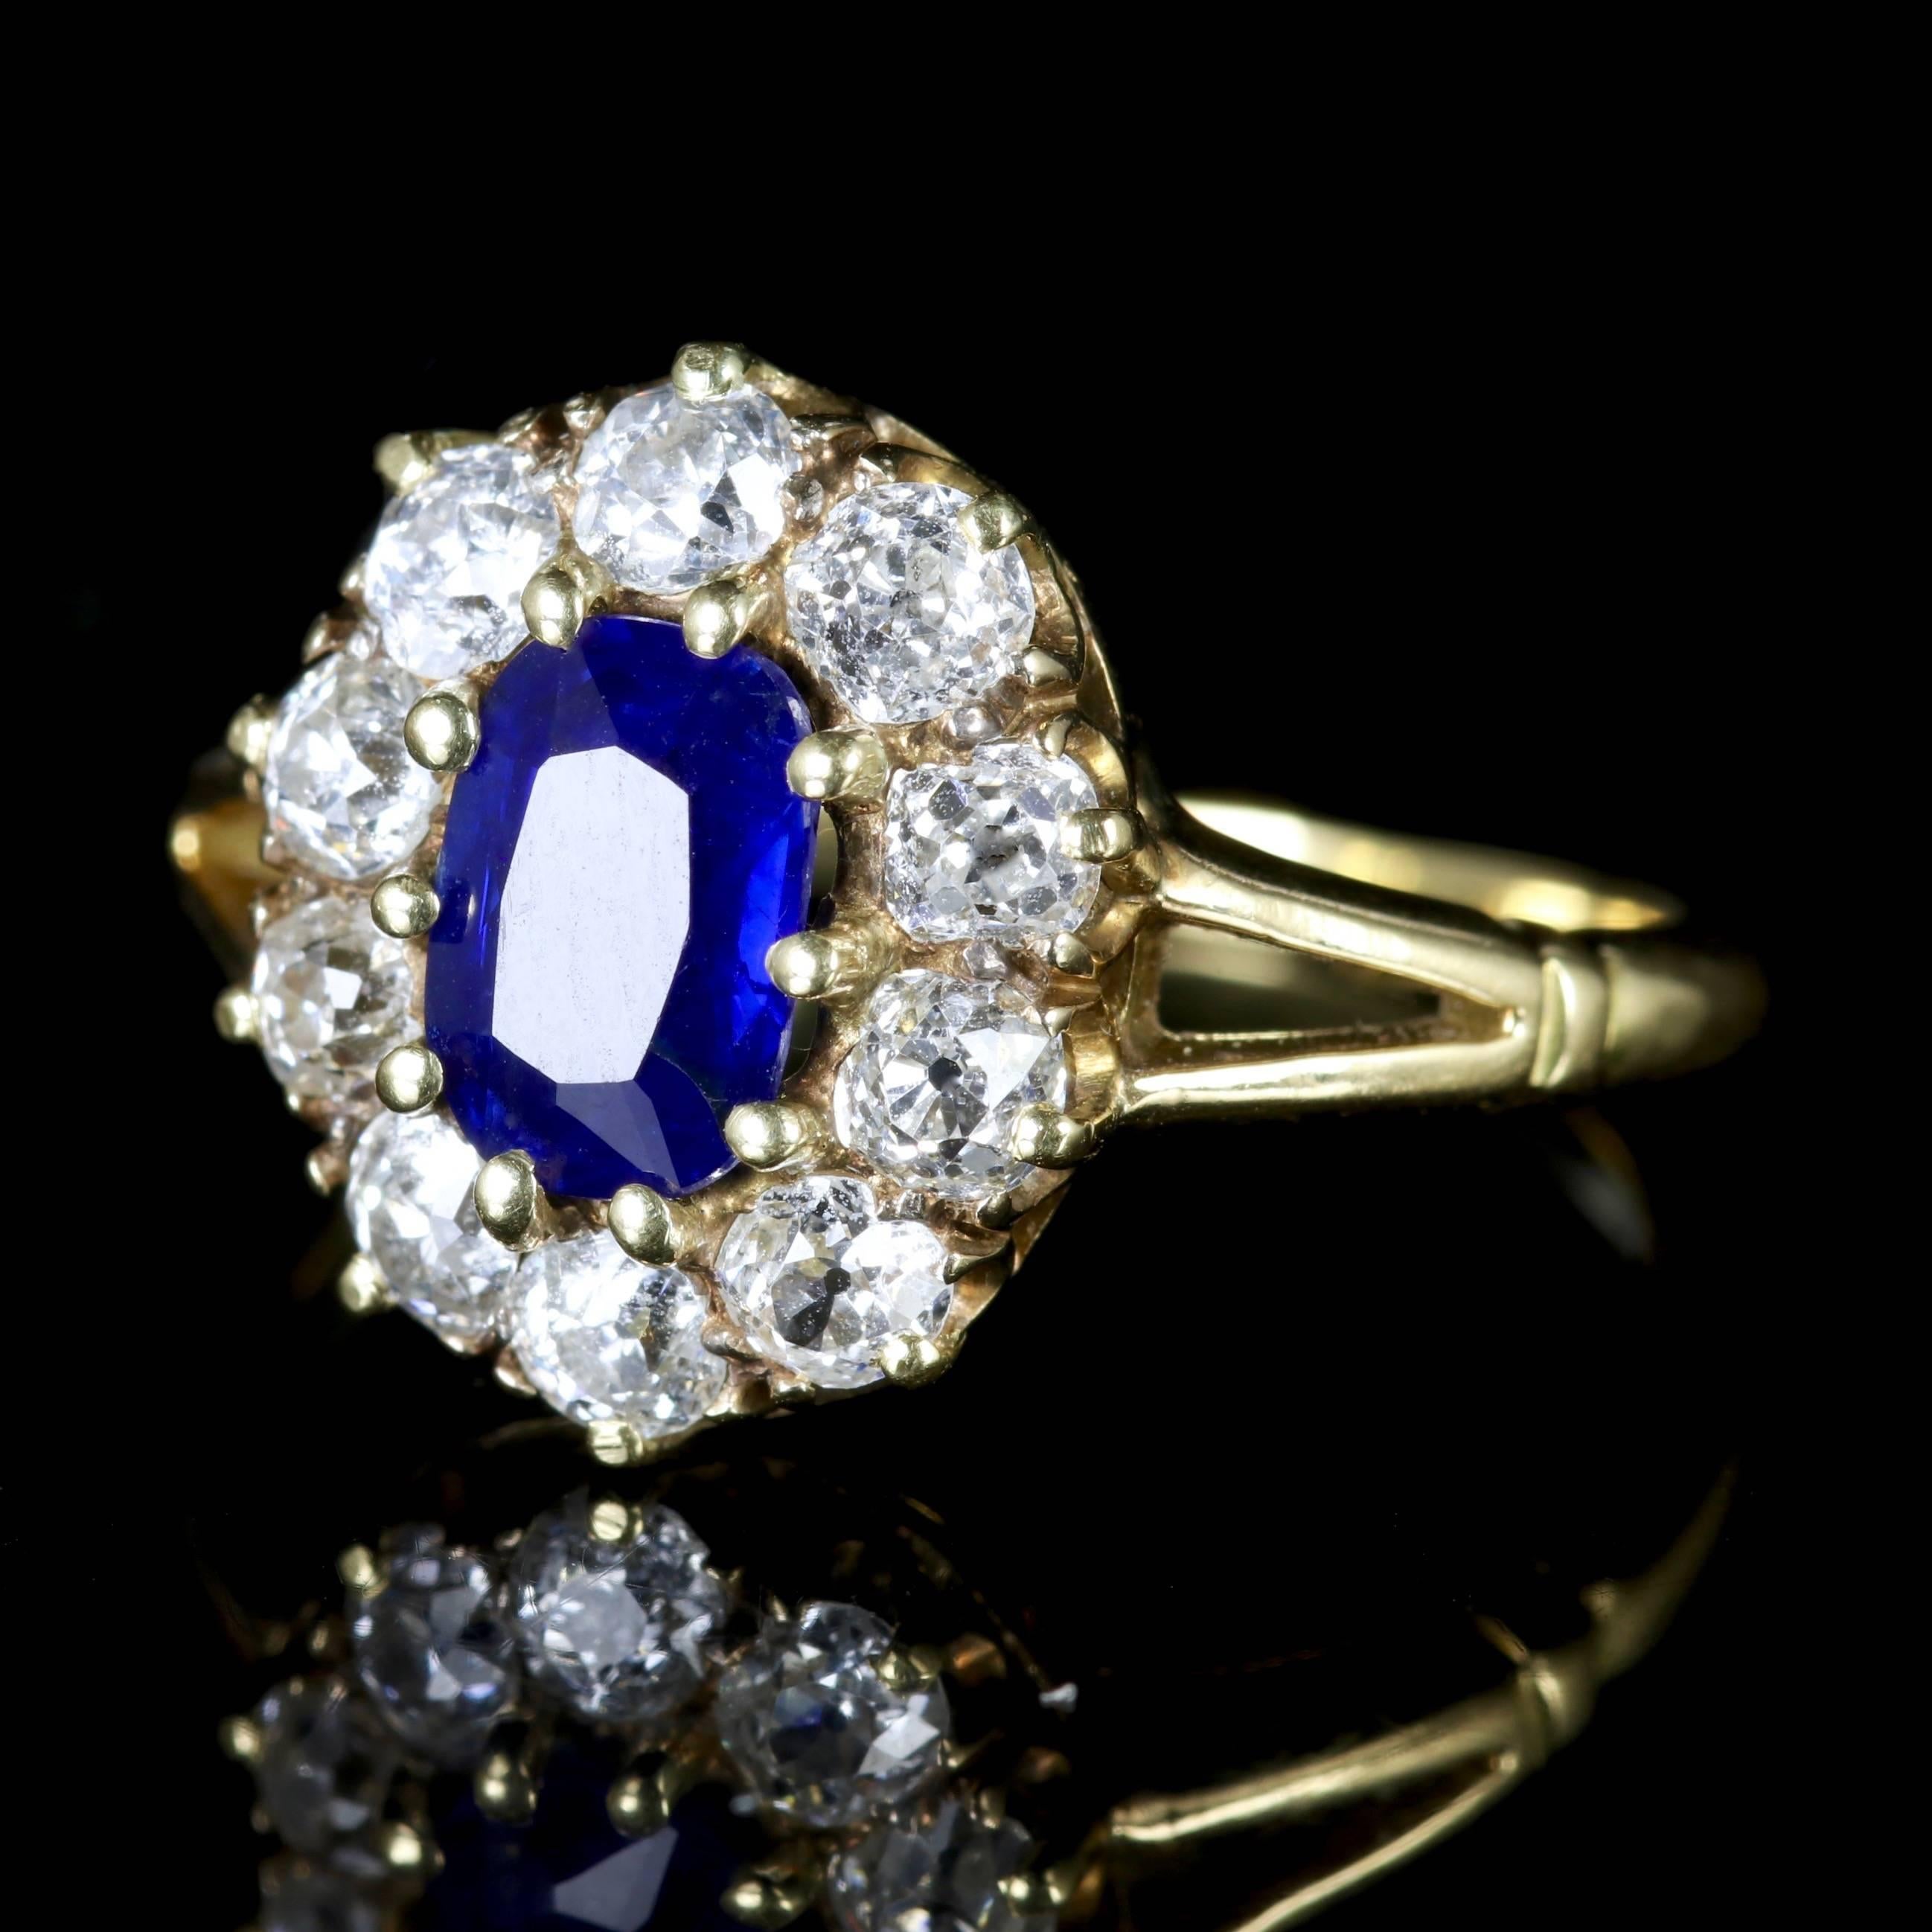 This beautiful Victorian 18ct Gold Sapphire and Diamond cluster ring is Circa 1900.

Set in an elegant, original setting which boasts a 1.45ct deep, blue Sapphire in the centre.

Sapphire is the symbol of feelings of sympathy, harmony friendship and